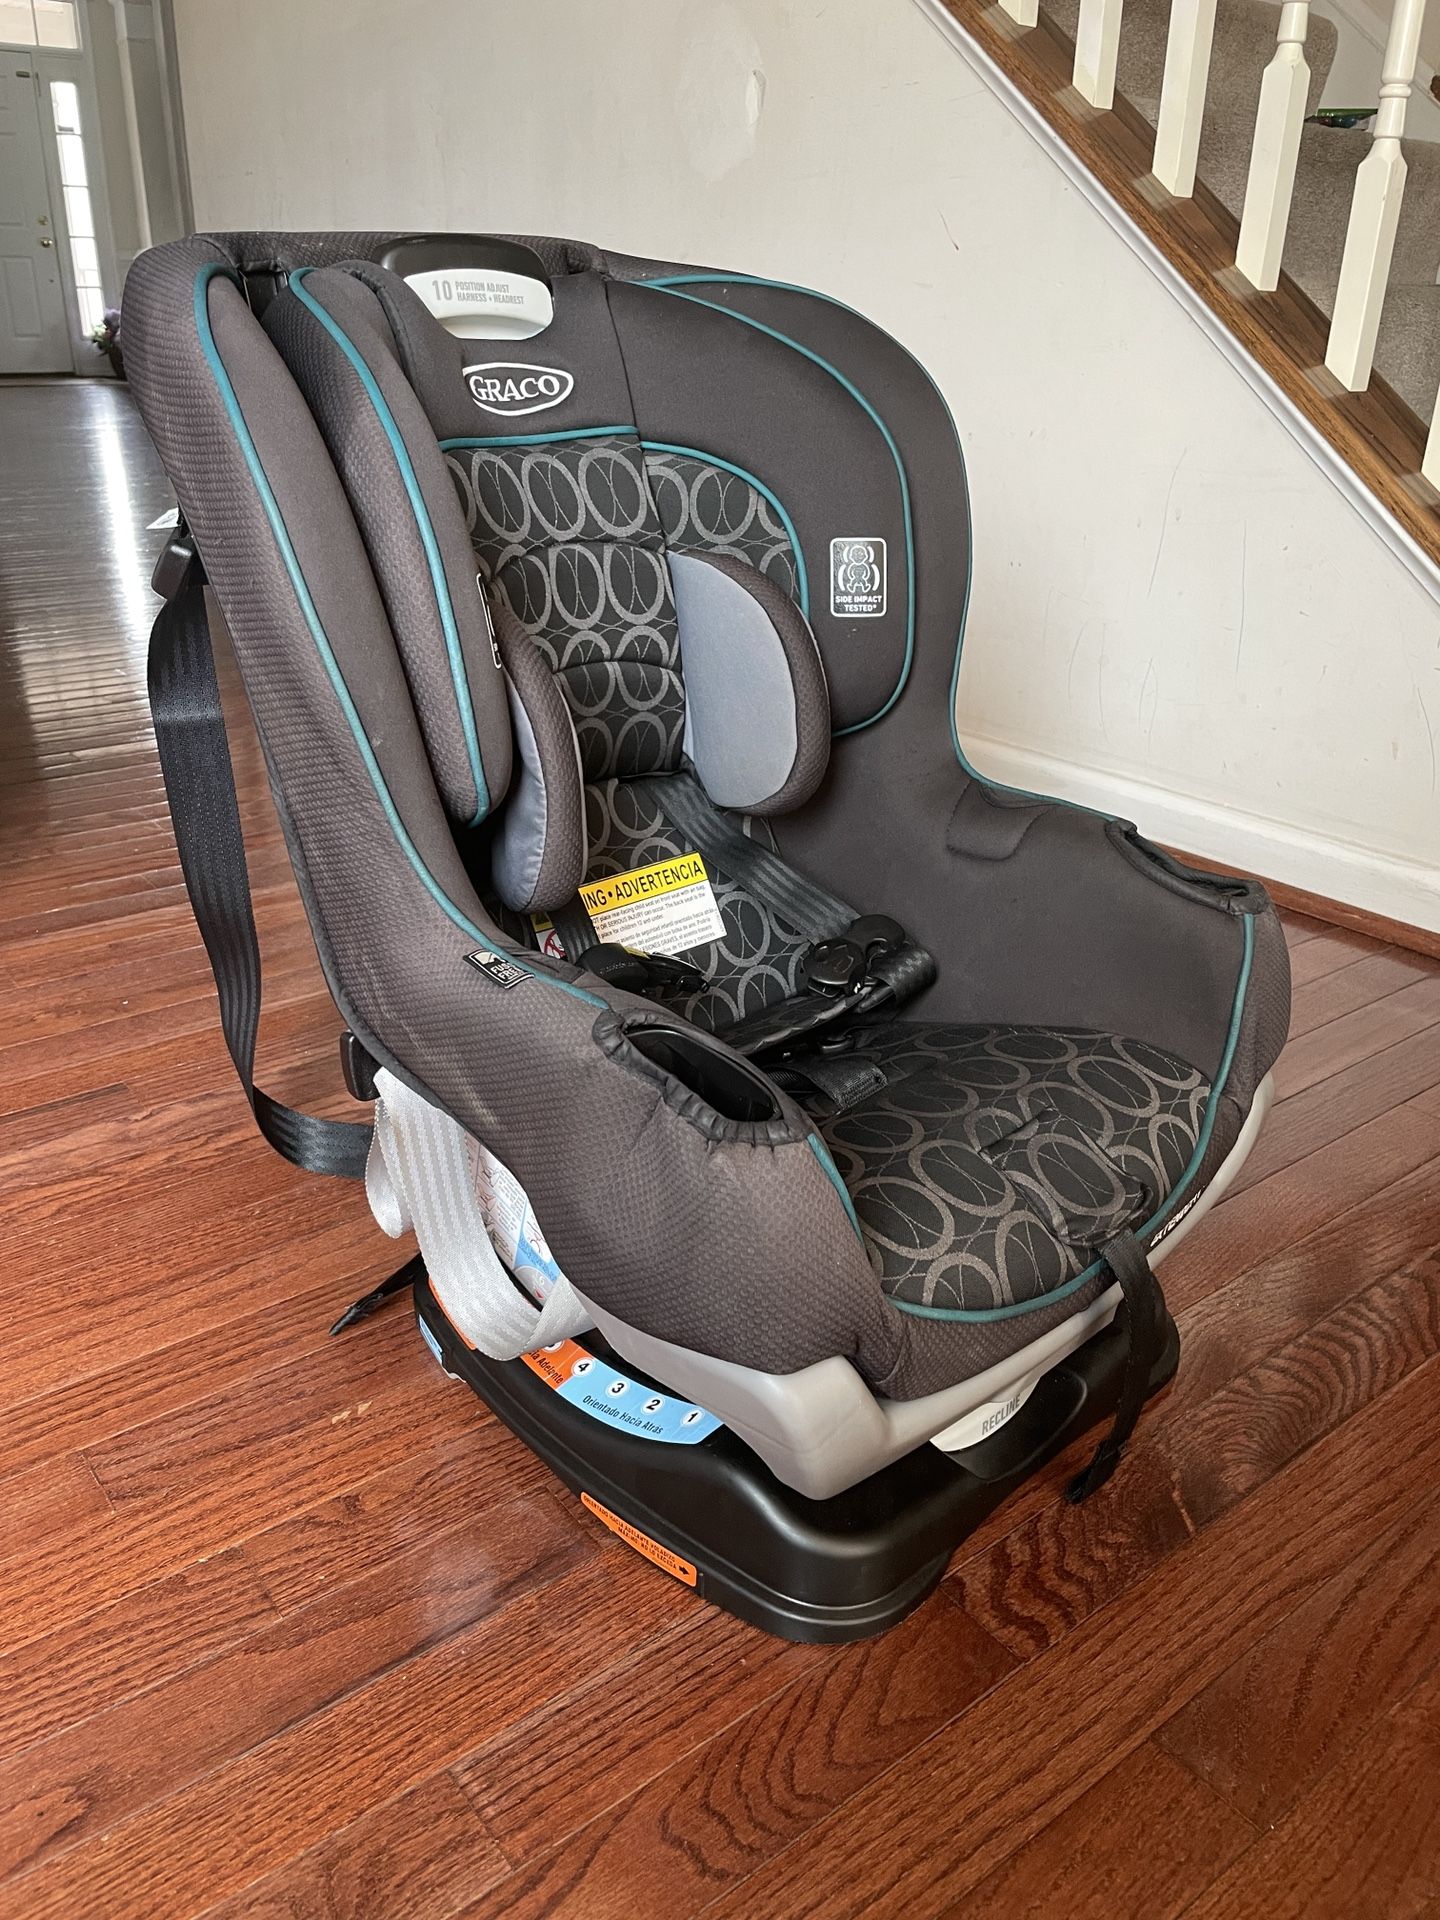 Graco Car seat for Newborn-Toddler